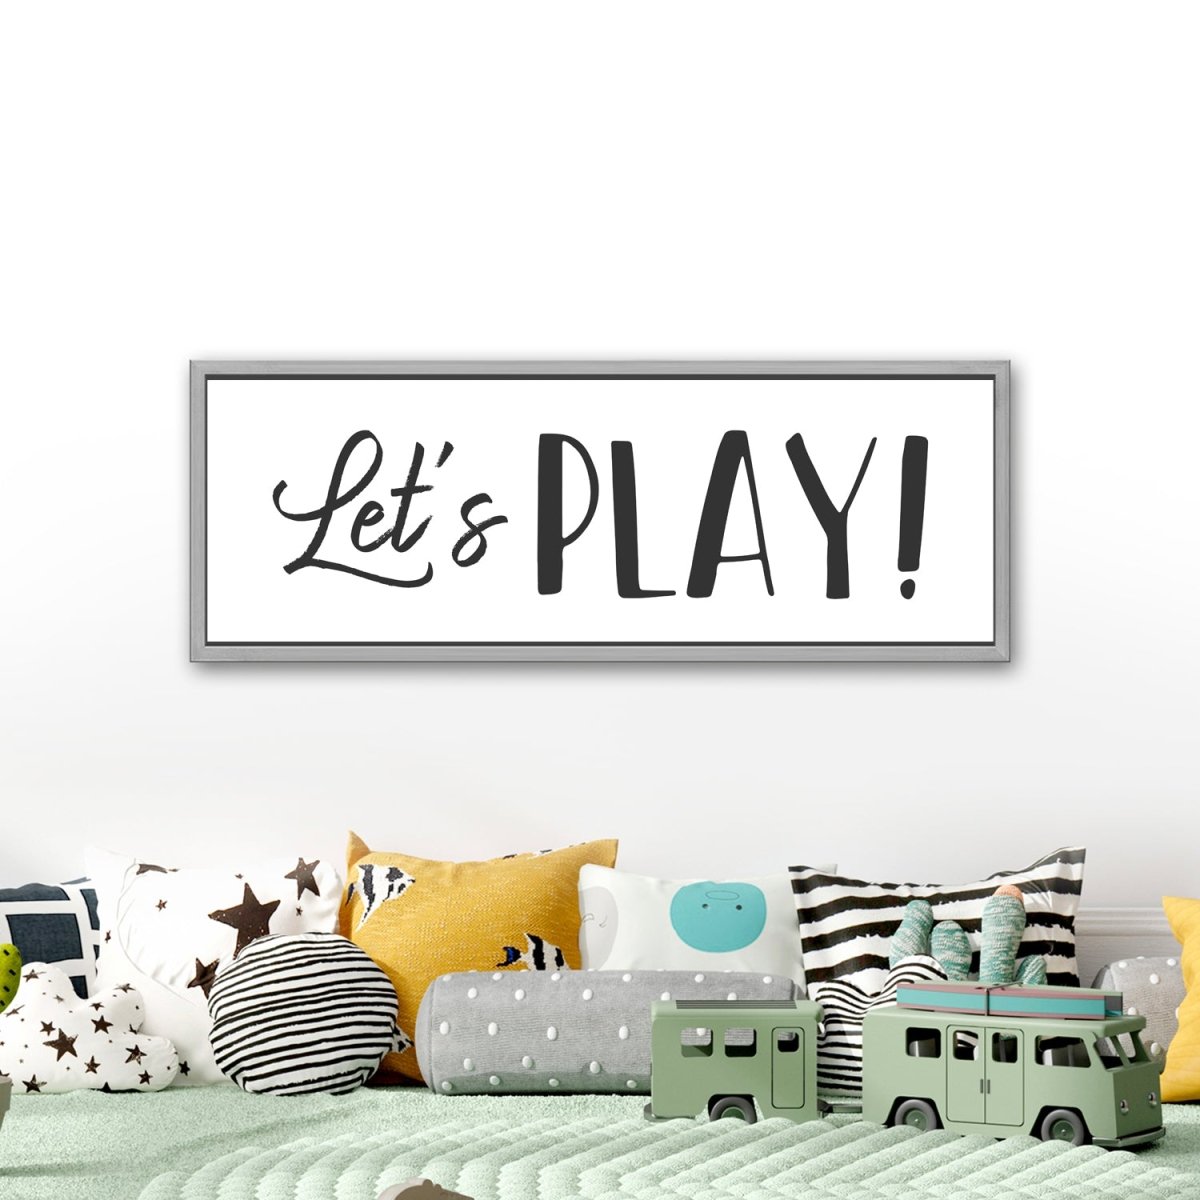 Let's Play Sign in Kids Bedroom Above Bed - Pretty Perfect Studio